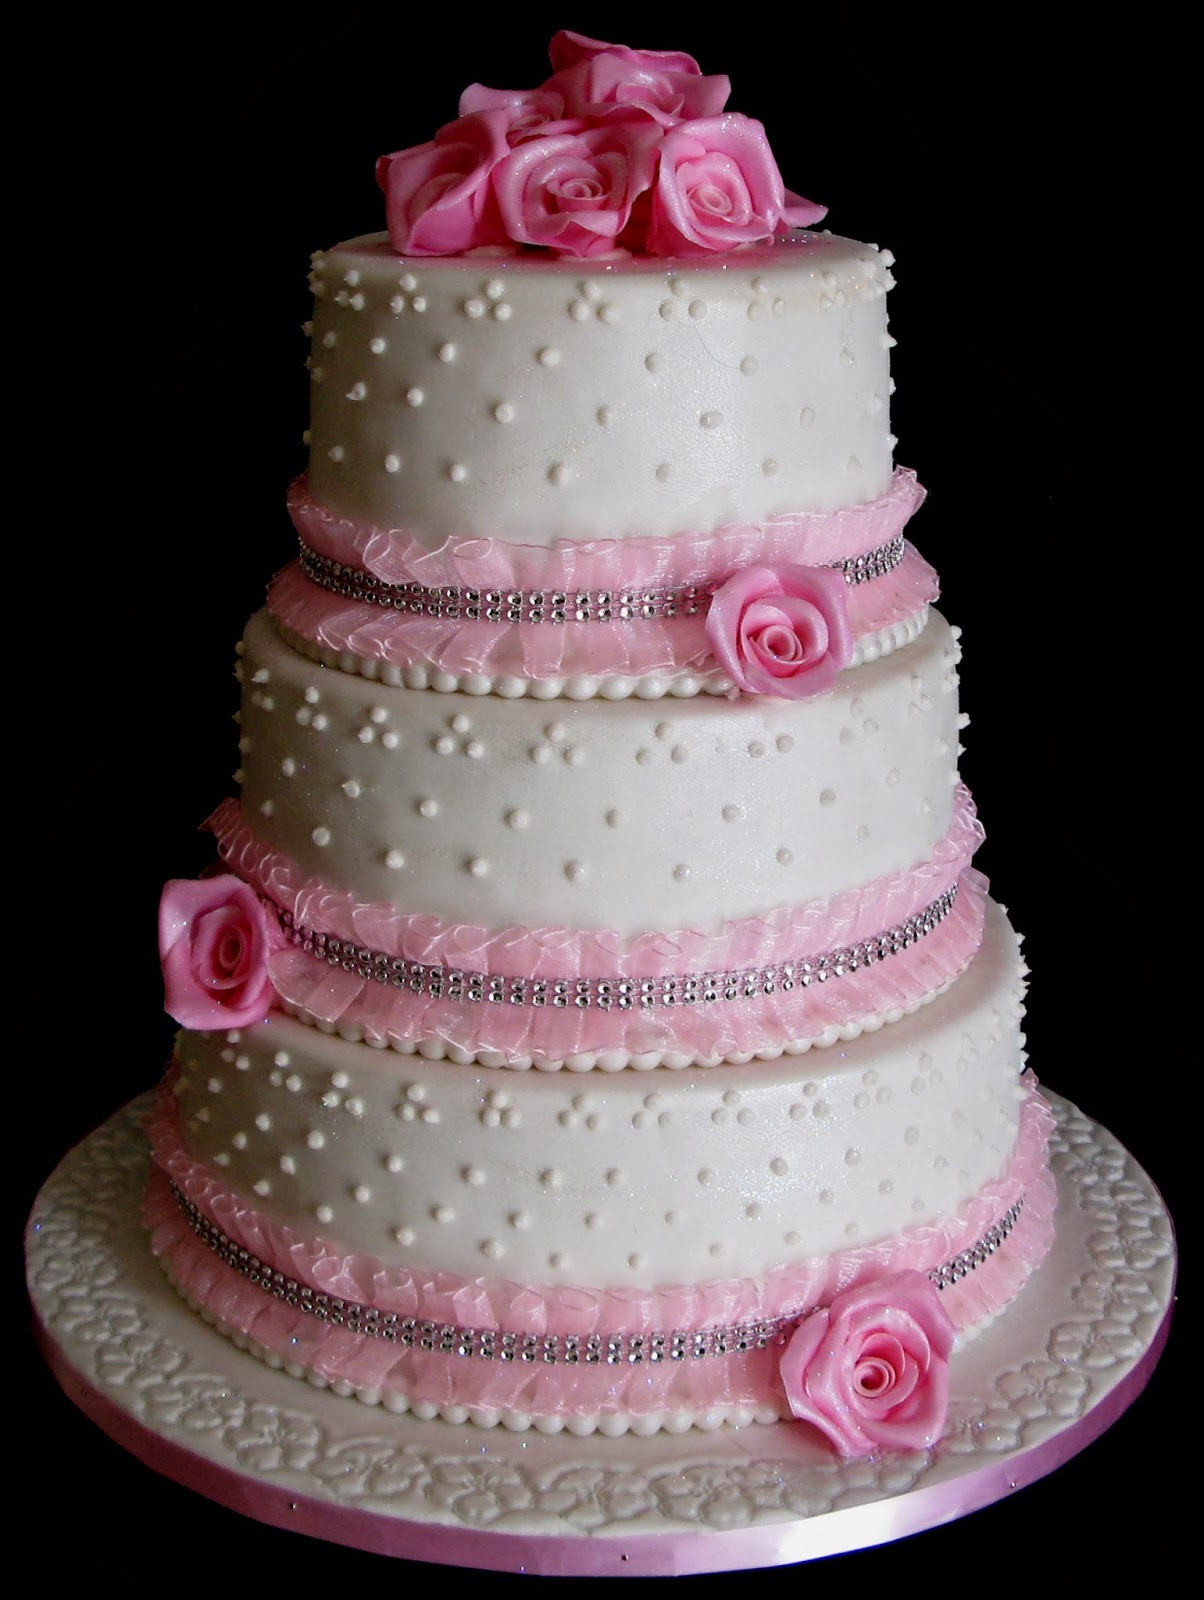 Three Layered Wedding Cakes the Best Ideas for Sugarcraft by soni Three Layer Wedding Cake Pink Roses